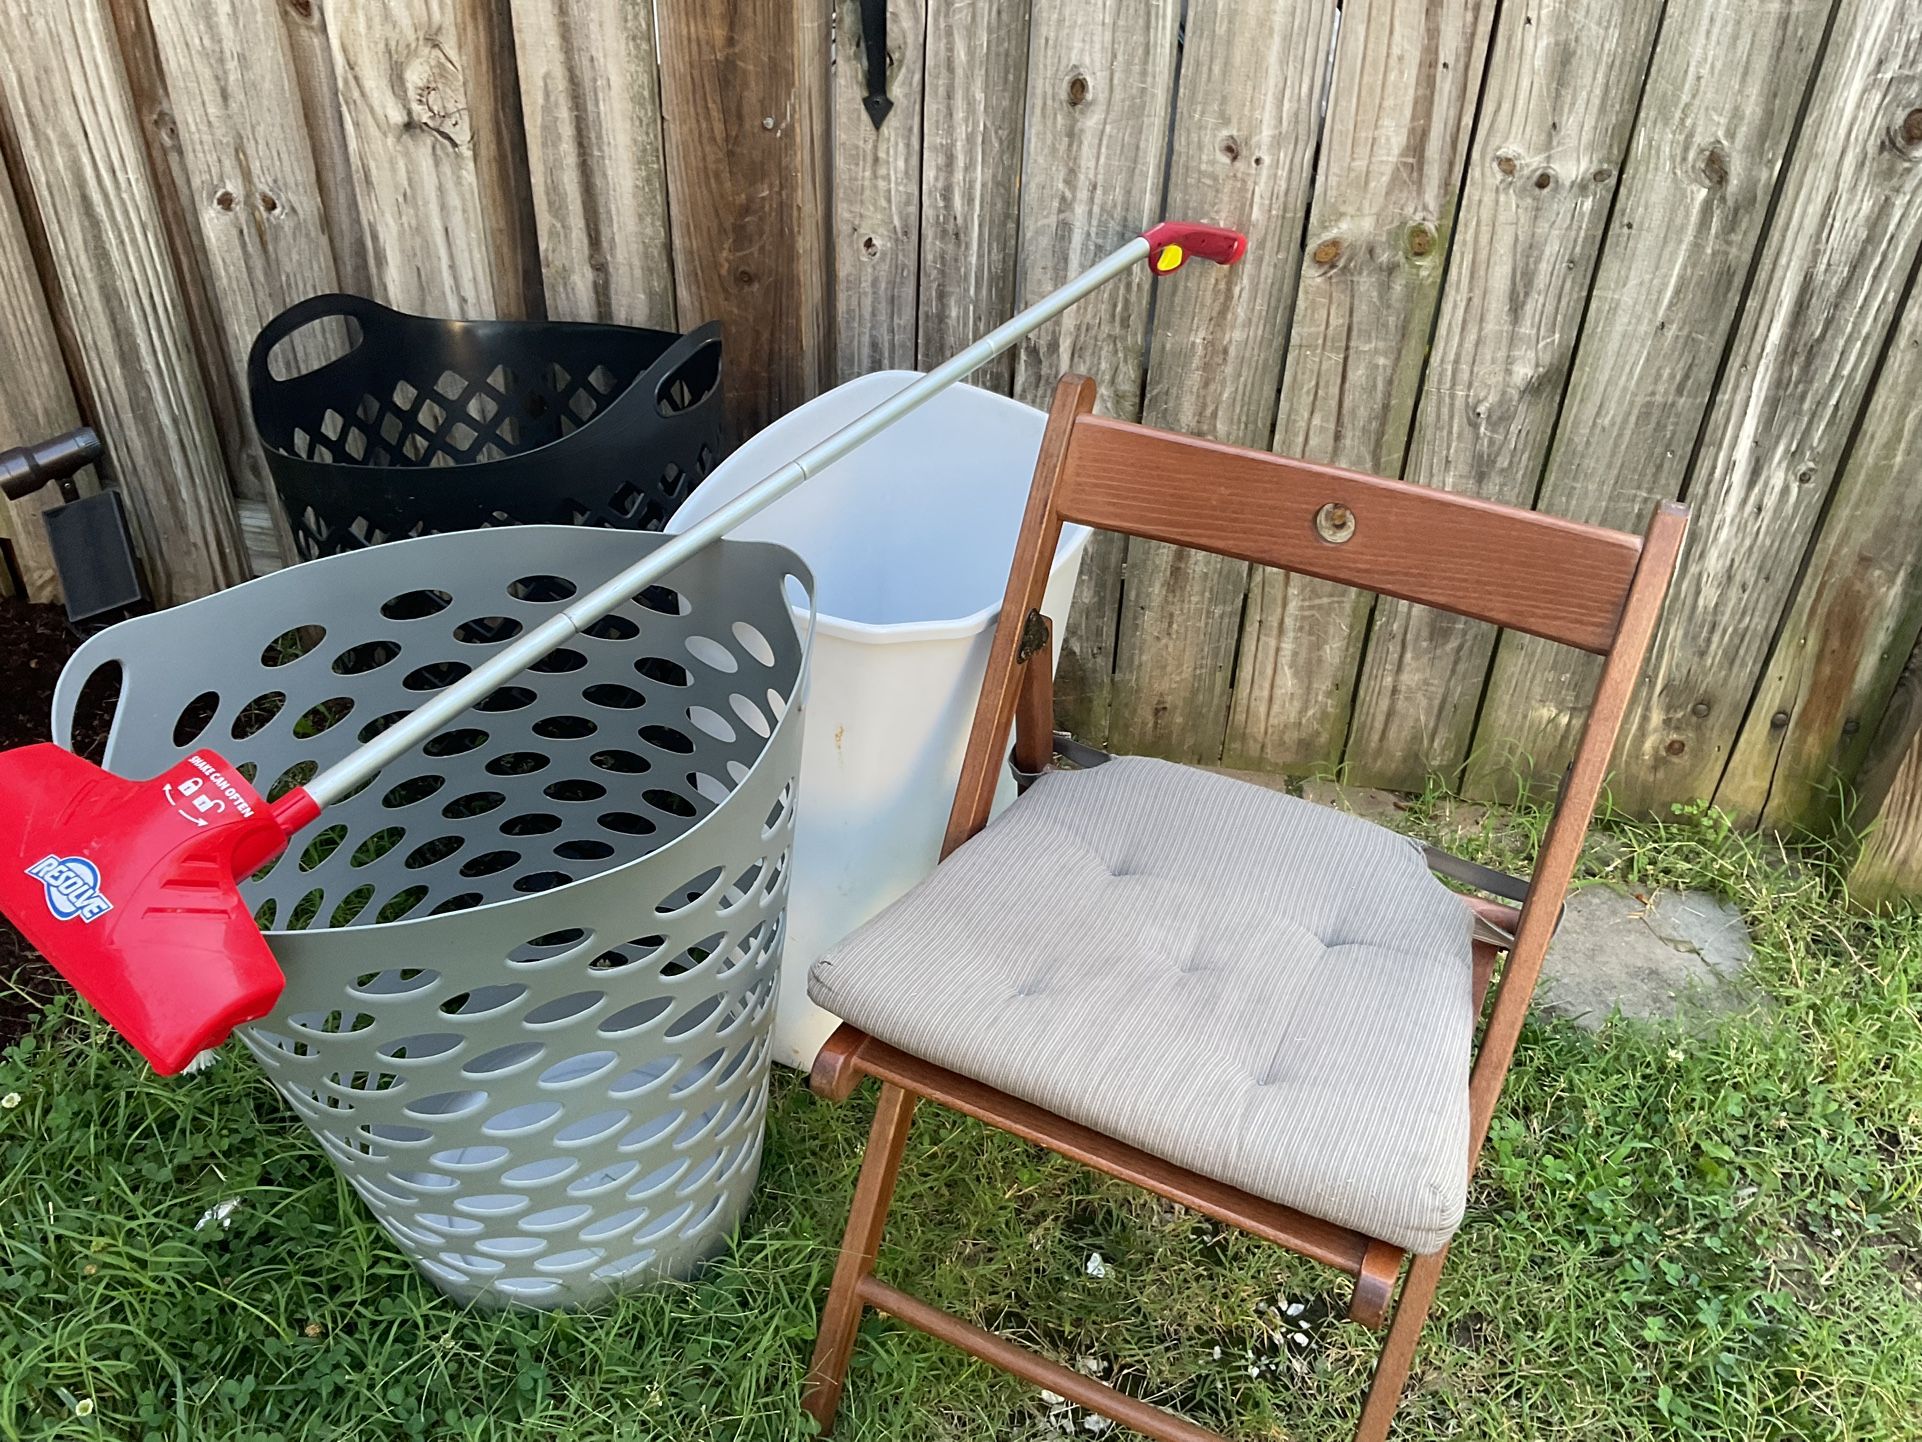 Two Beautiful Laundry Baskets, A Black And A Grey One Which Has A Little Cut.  Two Kitchen Trash  Cans, A Wooden Folding Chairs To Fold The Clothes.